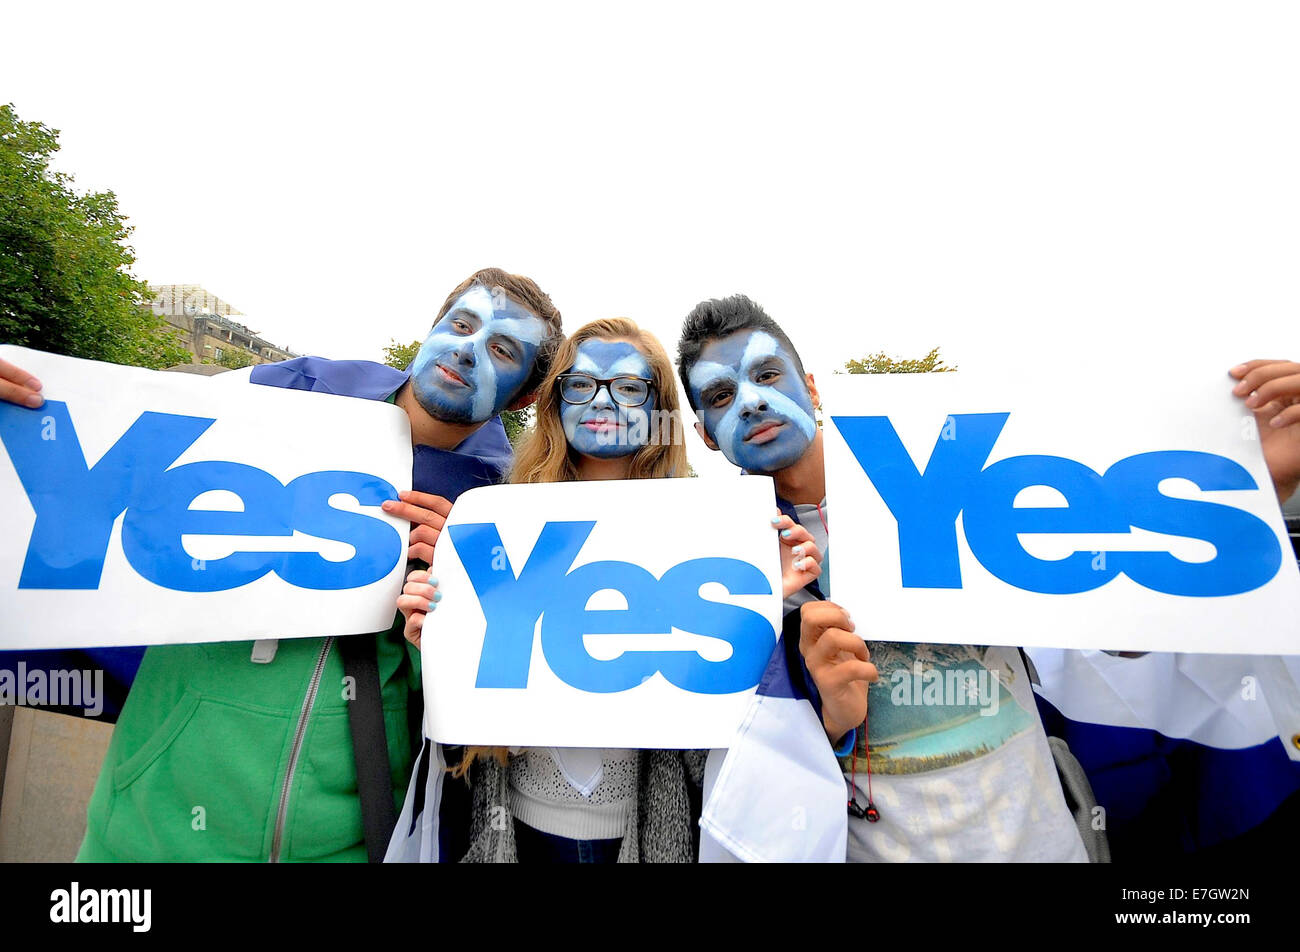 Edinburgh, United KIngdom. 17th Sep, 2014. Supporters for the ''YES'' vote were out pushing their vote for the undecided vote around Edinburgh.The group say this is one last push to reach undecided voters for the Scottish referendum vote. Credit:  Gail Orenstein/ZUMA Wire/Alamy Live News Stock Photo